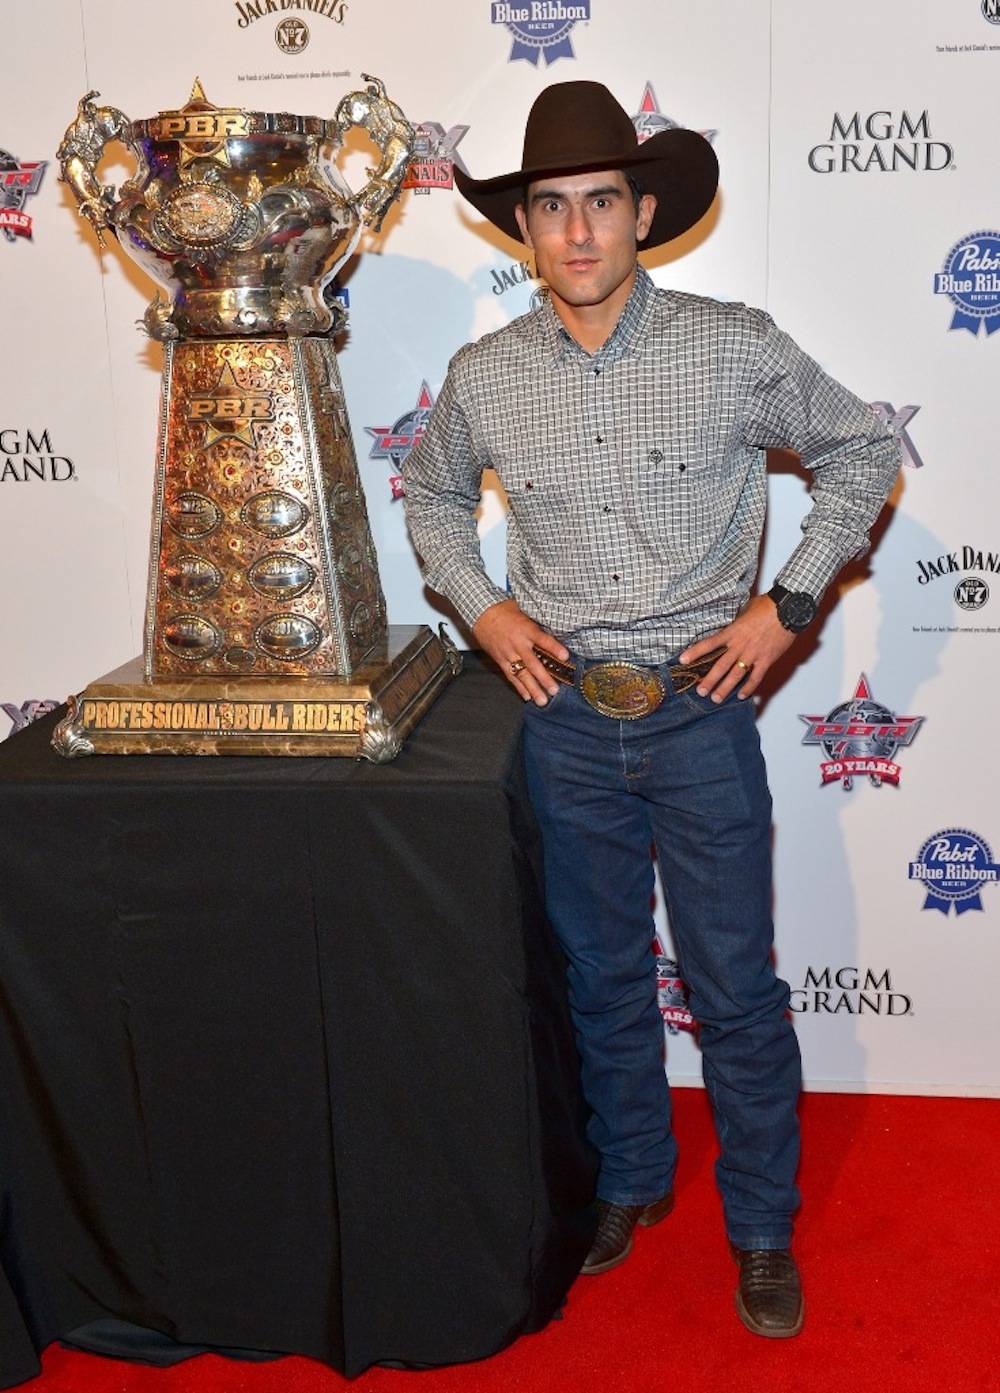 10.21.13 Reigning and two-time PBR World Champion Silvano Alves at the Welcome Reception at MGM Grand. Photo by Bryan Steffy